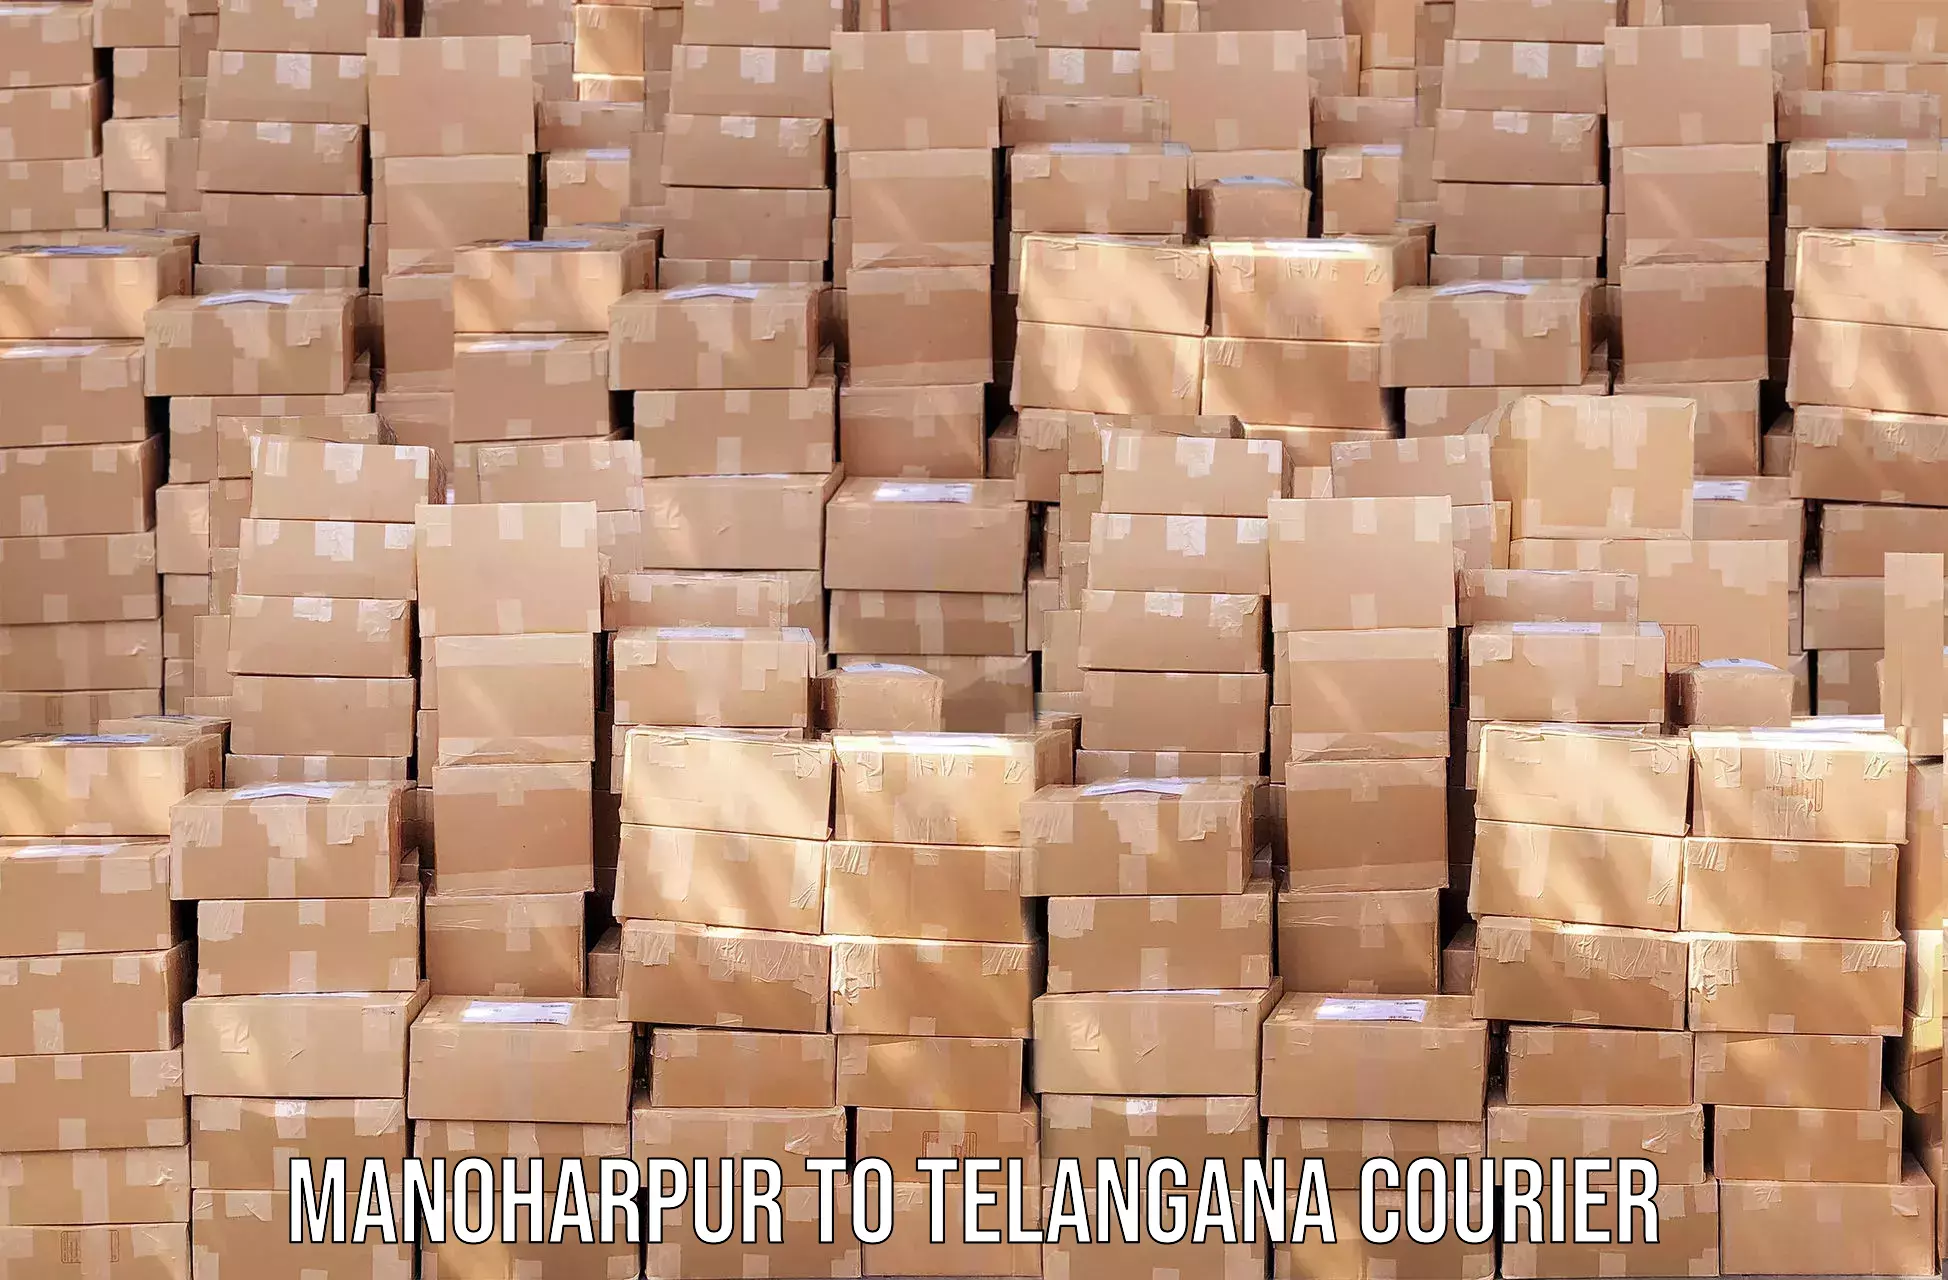 Courier services in Manoharpur to Warangal